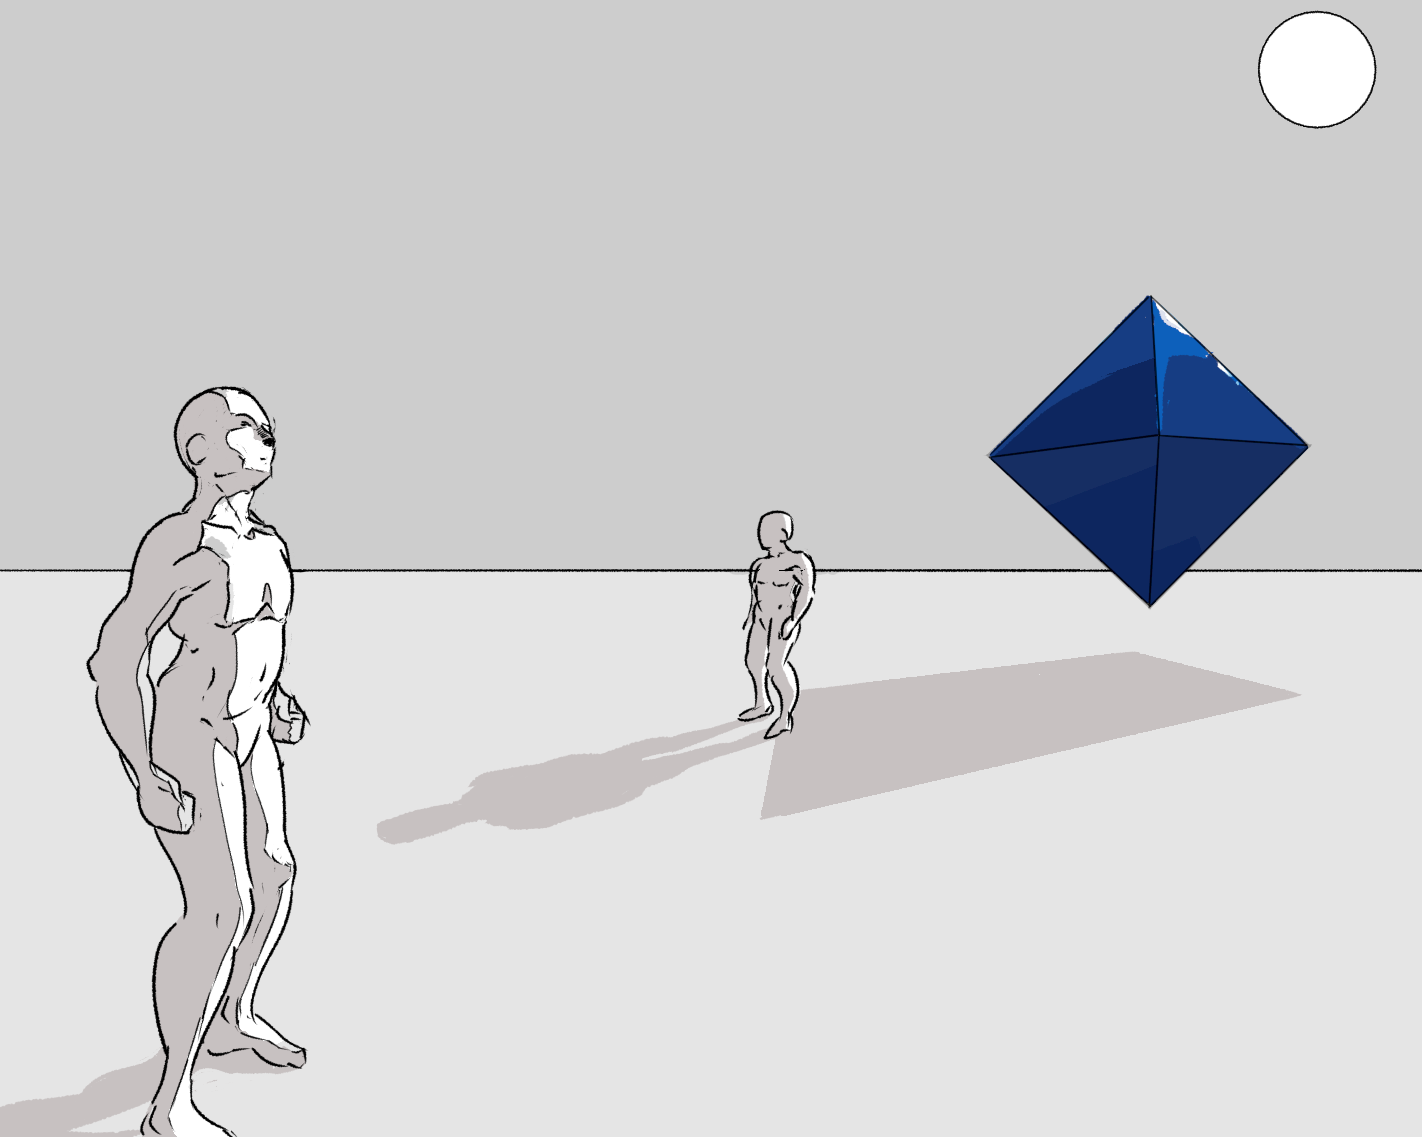 The octahedron is now shaded blue and the shadow we drew filled in grey.